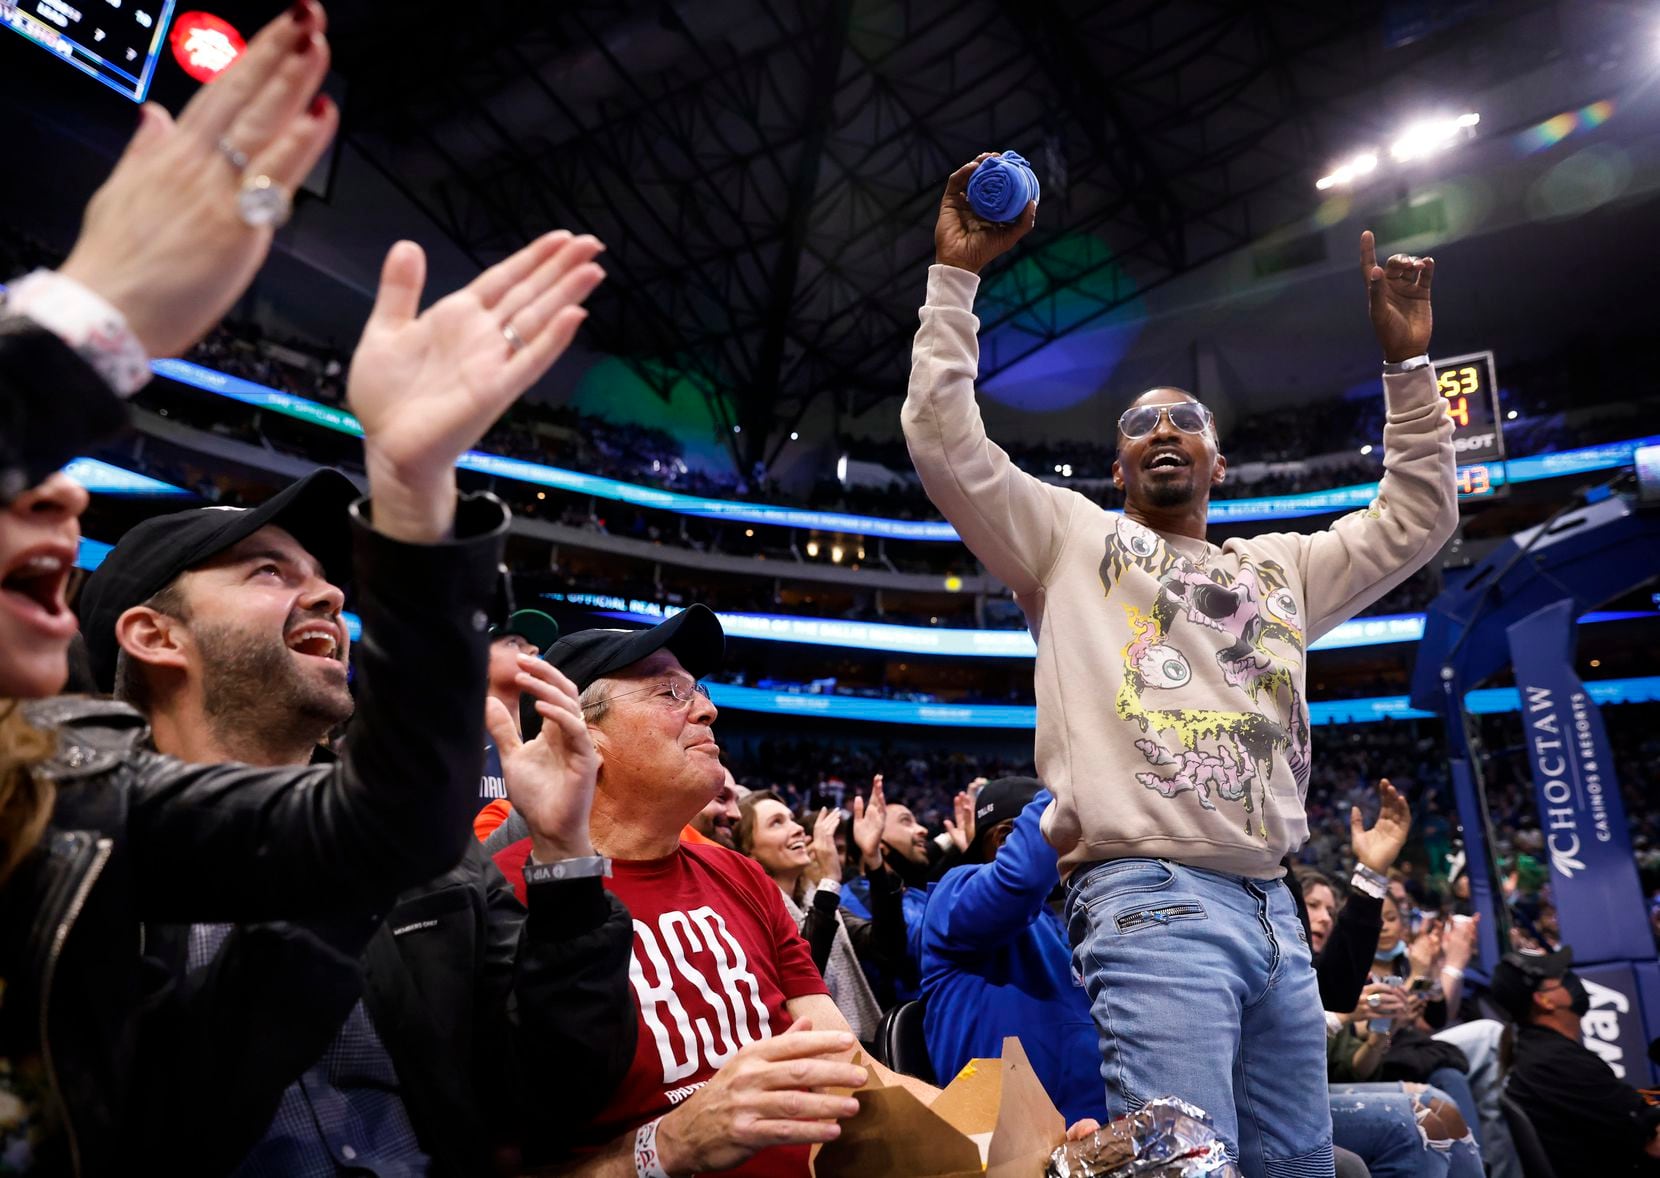 Actor Jamie Foxx acknowledges cheers from the fans as he's introduced during the first half of the Dallas Mavericks-Washington Wizards game at the American Airlines Center in Dallas, November 27, 2021. (Tom Fox/The Dallas Morning News)